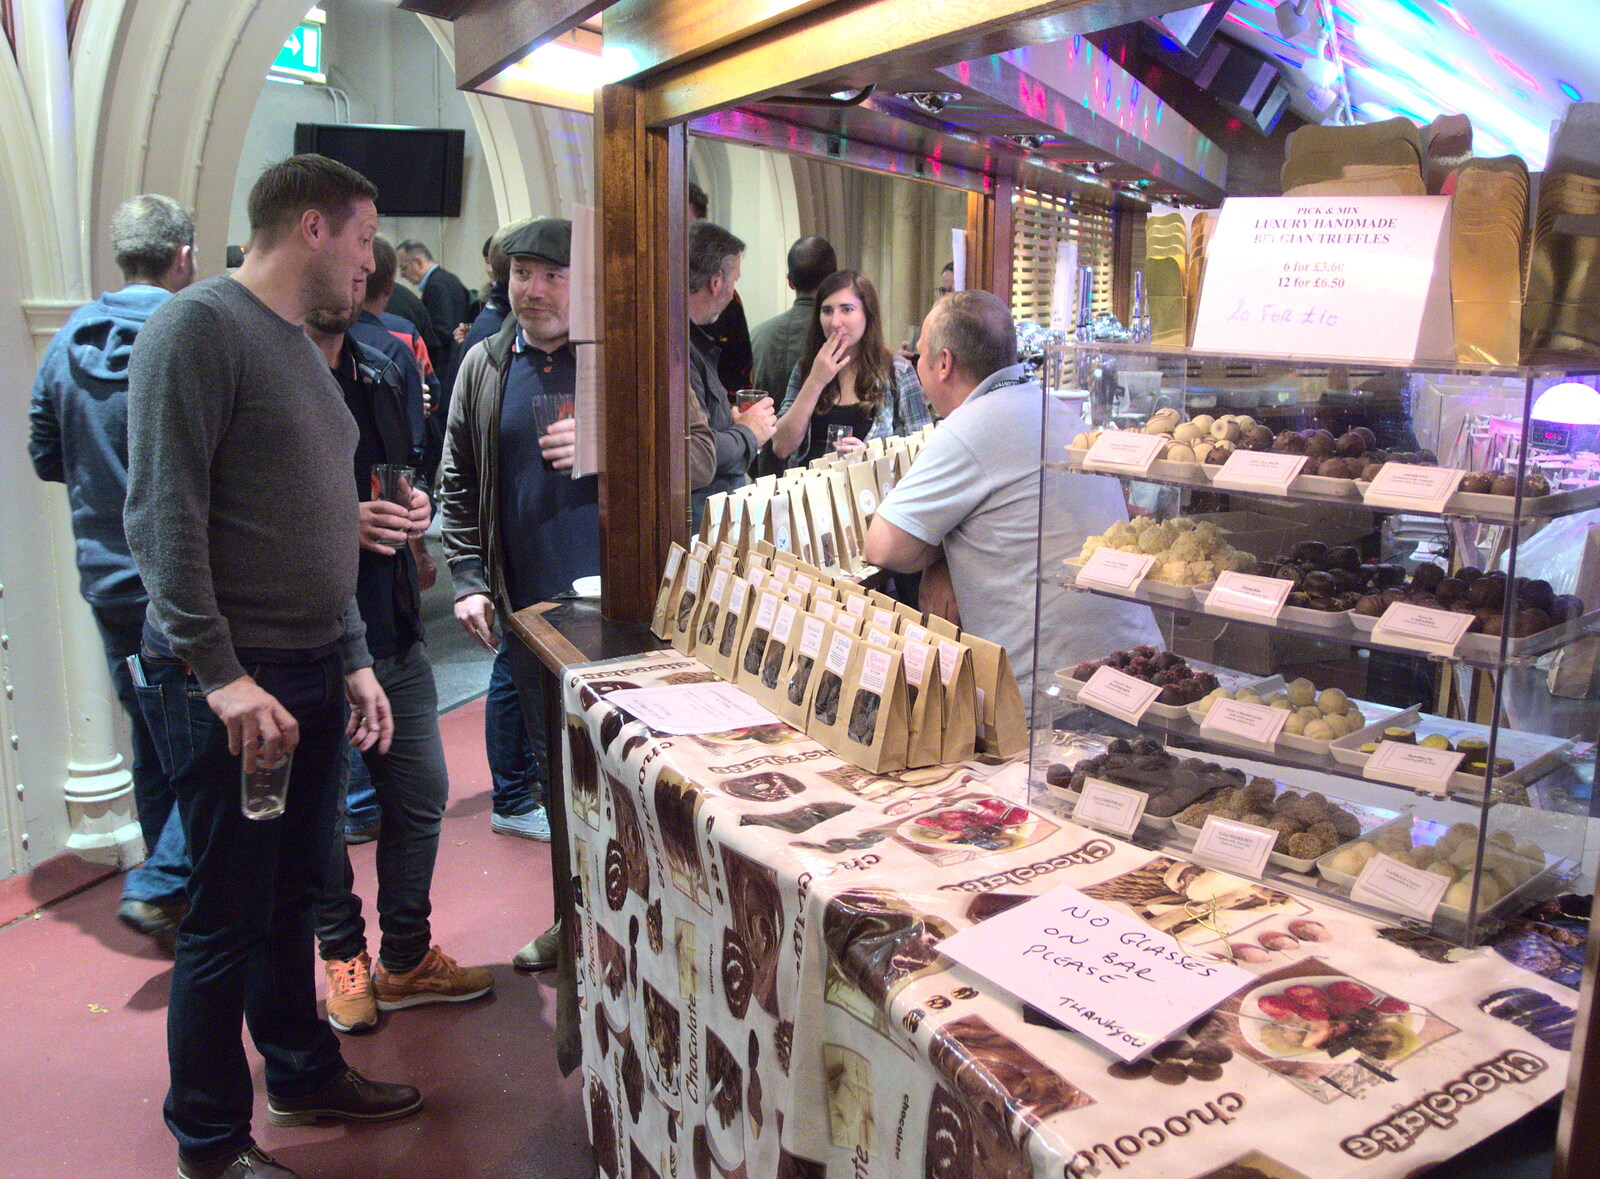 More chocolate products from The 38th Norwich Beer Festival, Norwich, Norfolk - 28th October 2015